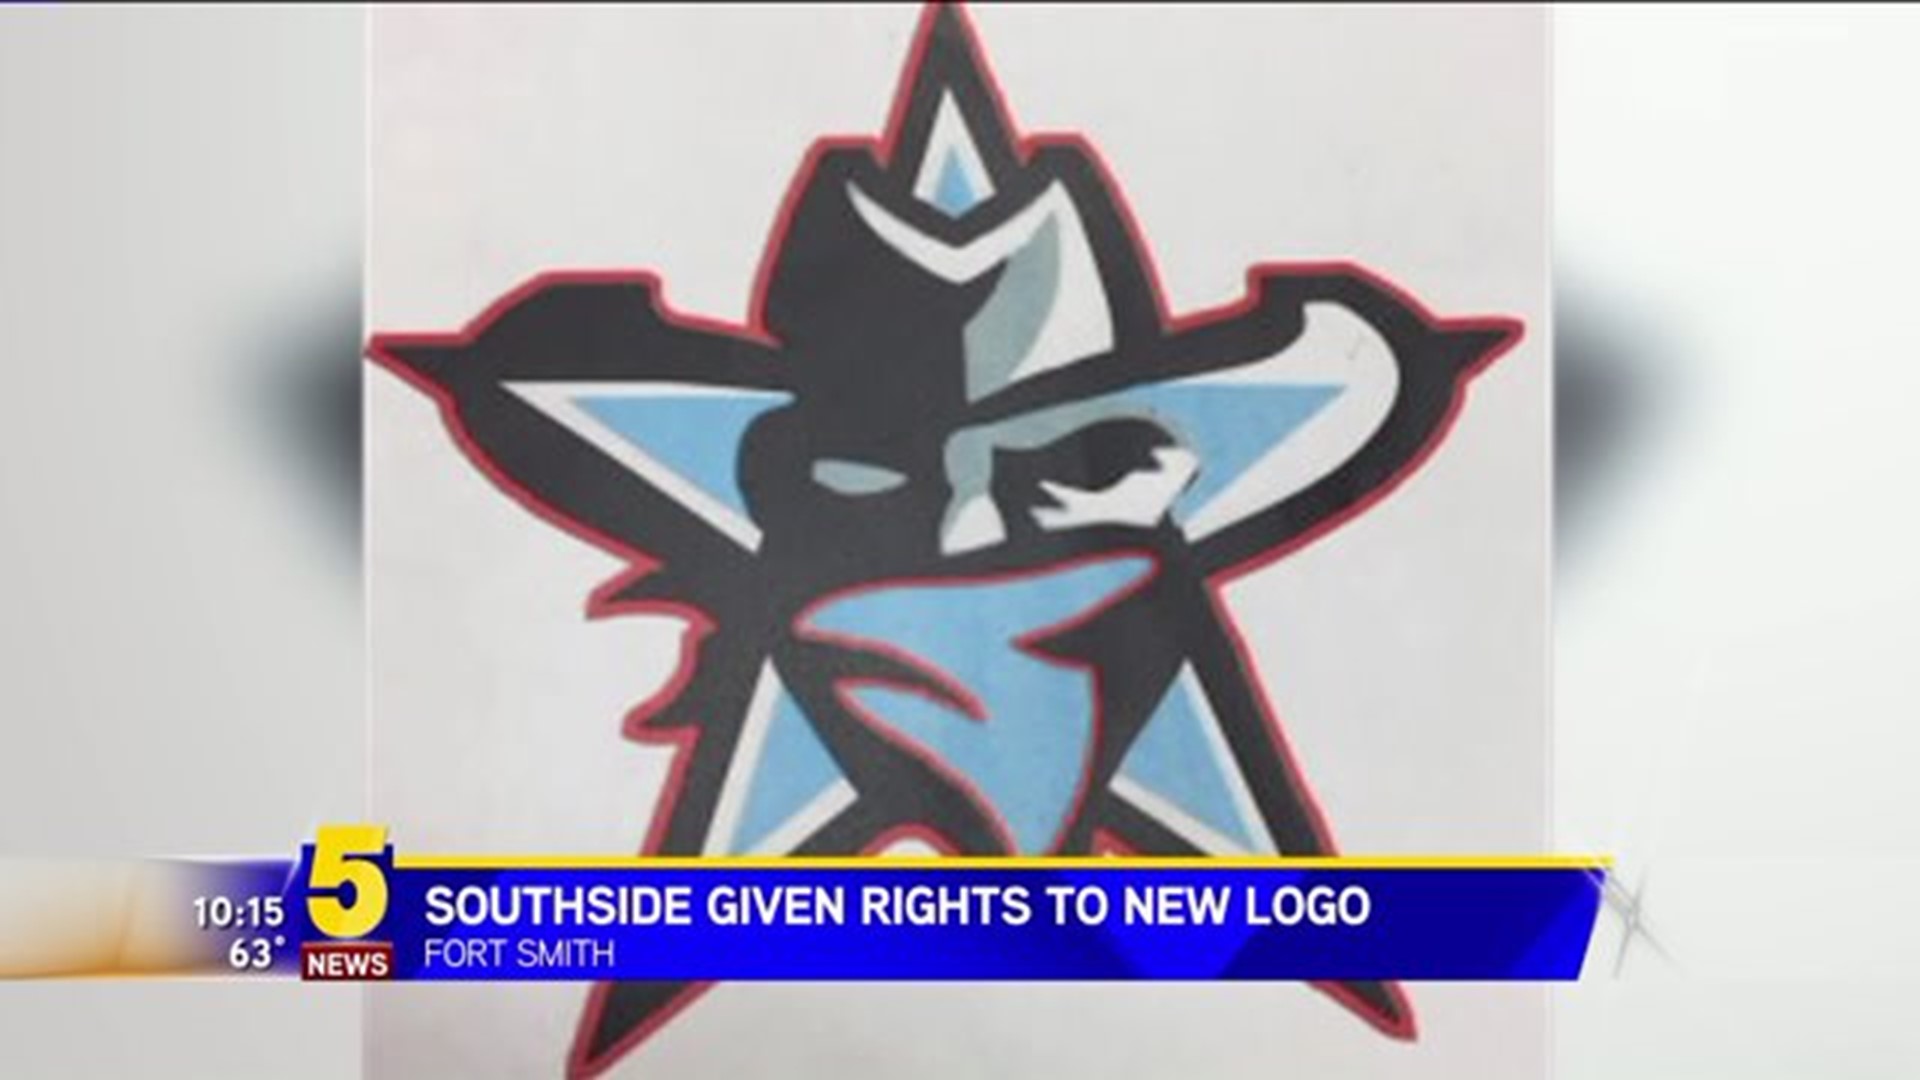 SOUTHSIDE GETS RIGHTS TO LOGO